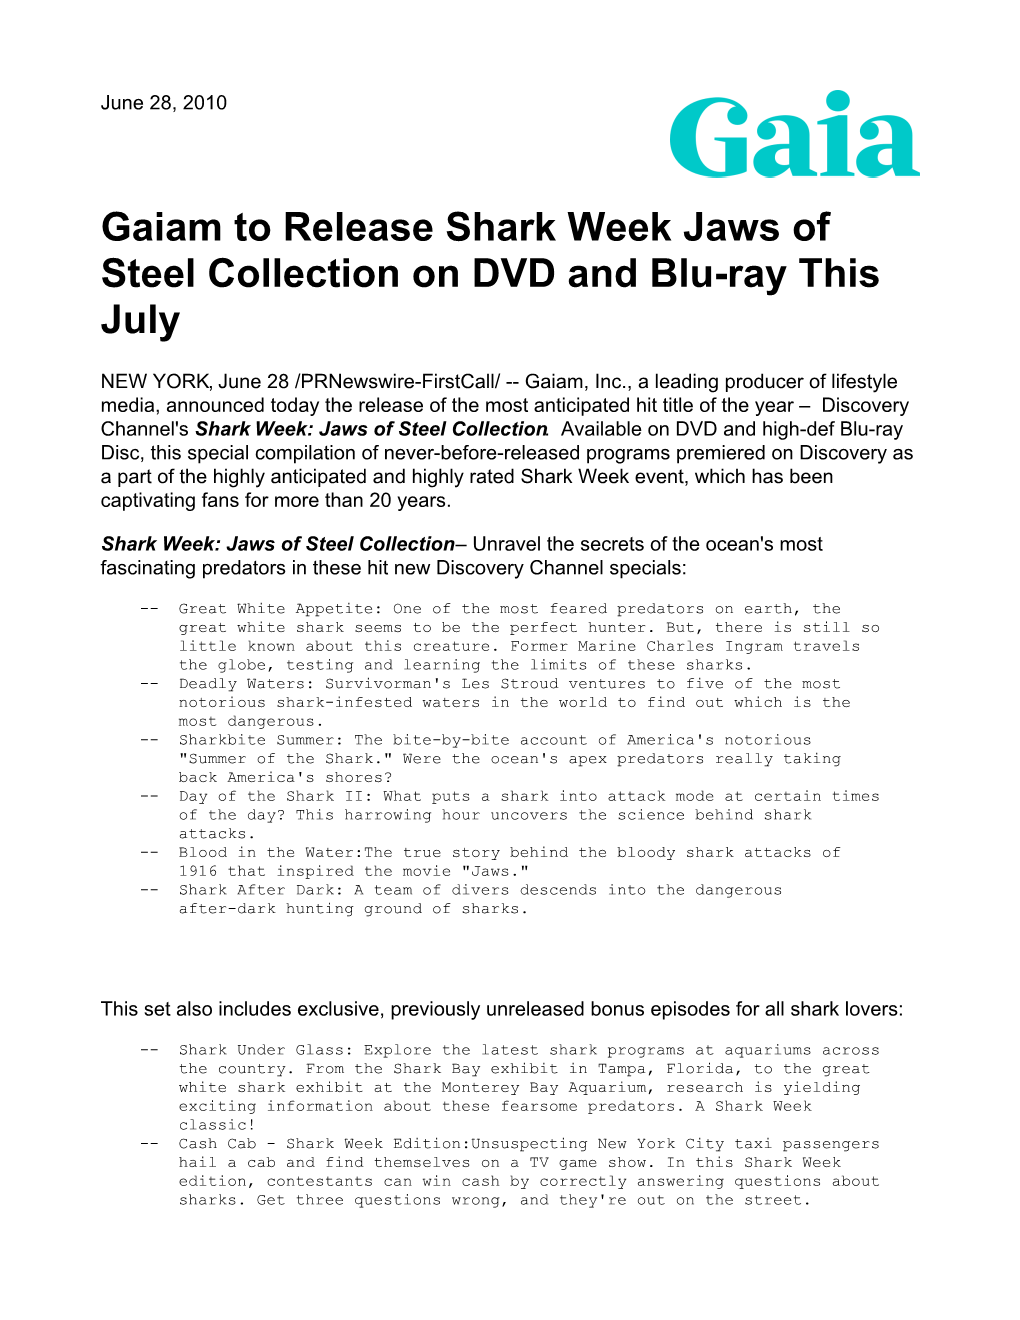 Gaiam to Release Shark Week Jaws of Steel Collection on DVD and Blu-Ray This July